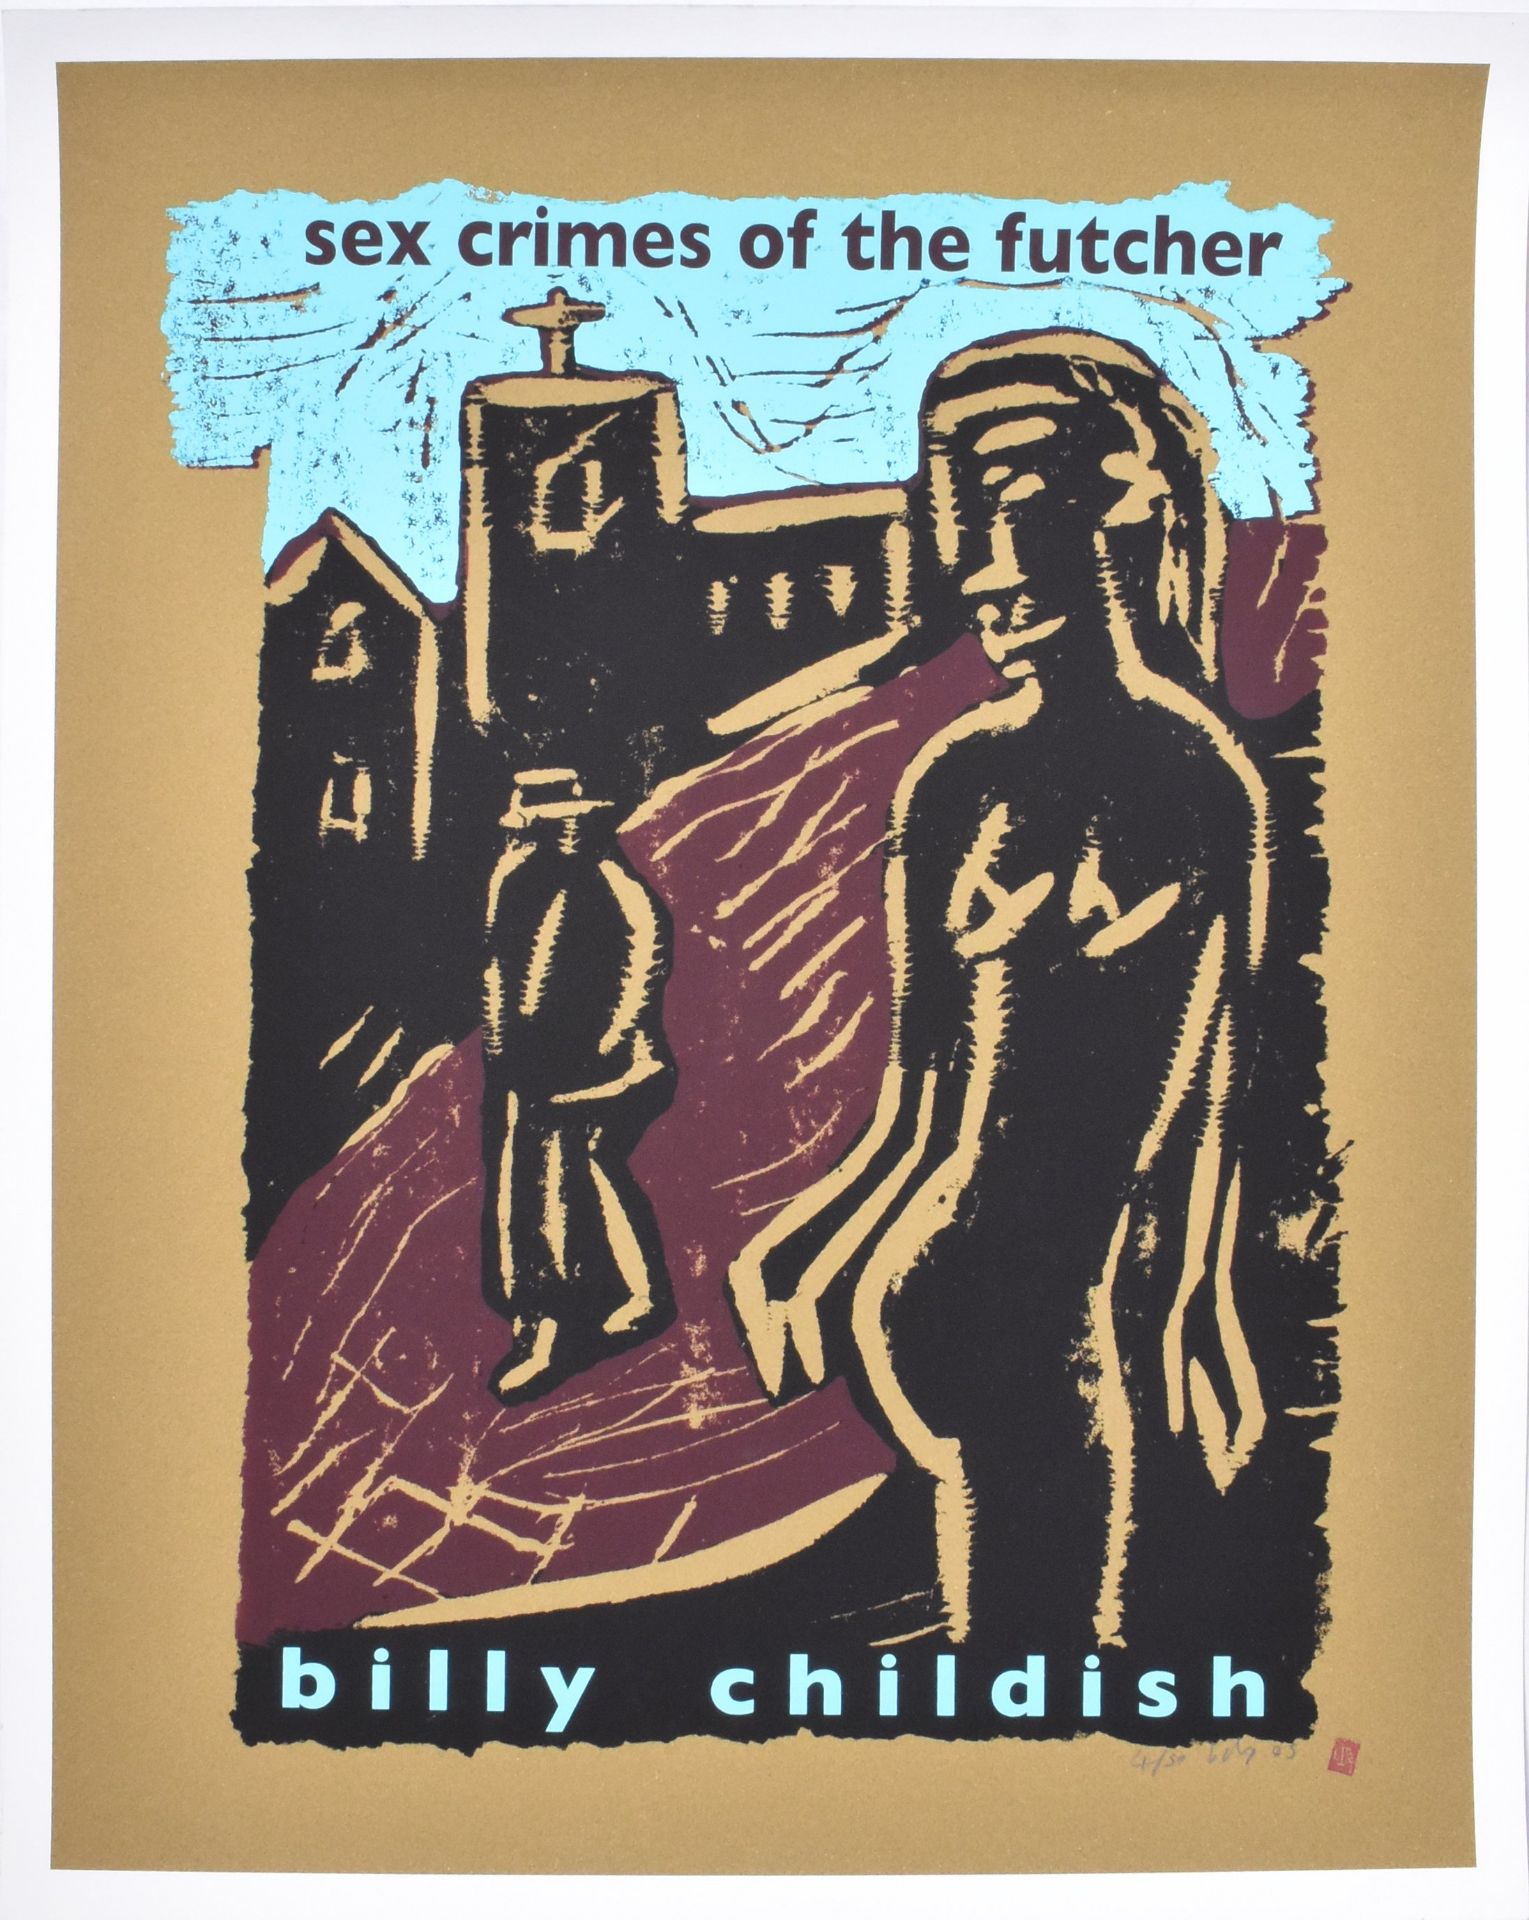 BILLY CHILDISH (B.1959) - SEX CRIMES OF THE FUTCHER, 2005 - Image 2 of 4